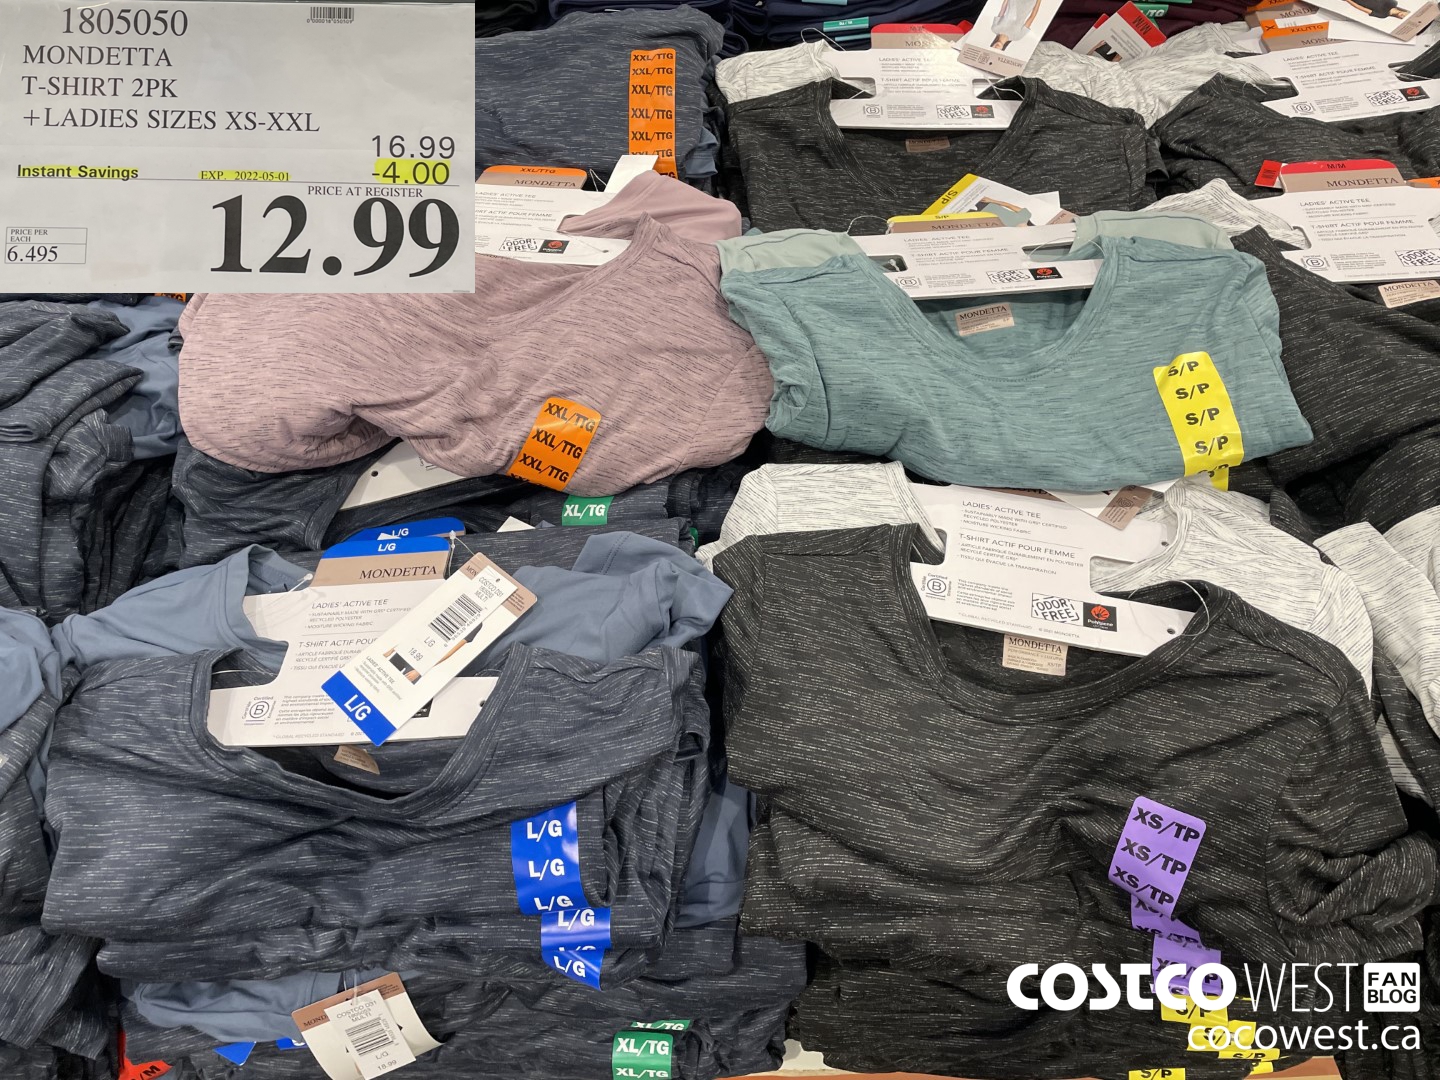 Costco's Top Finds in Women's Clothing Part Two! Lots of great